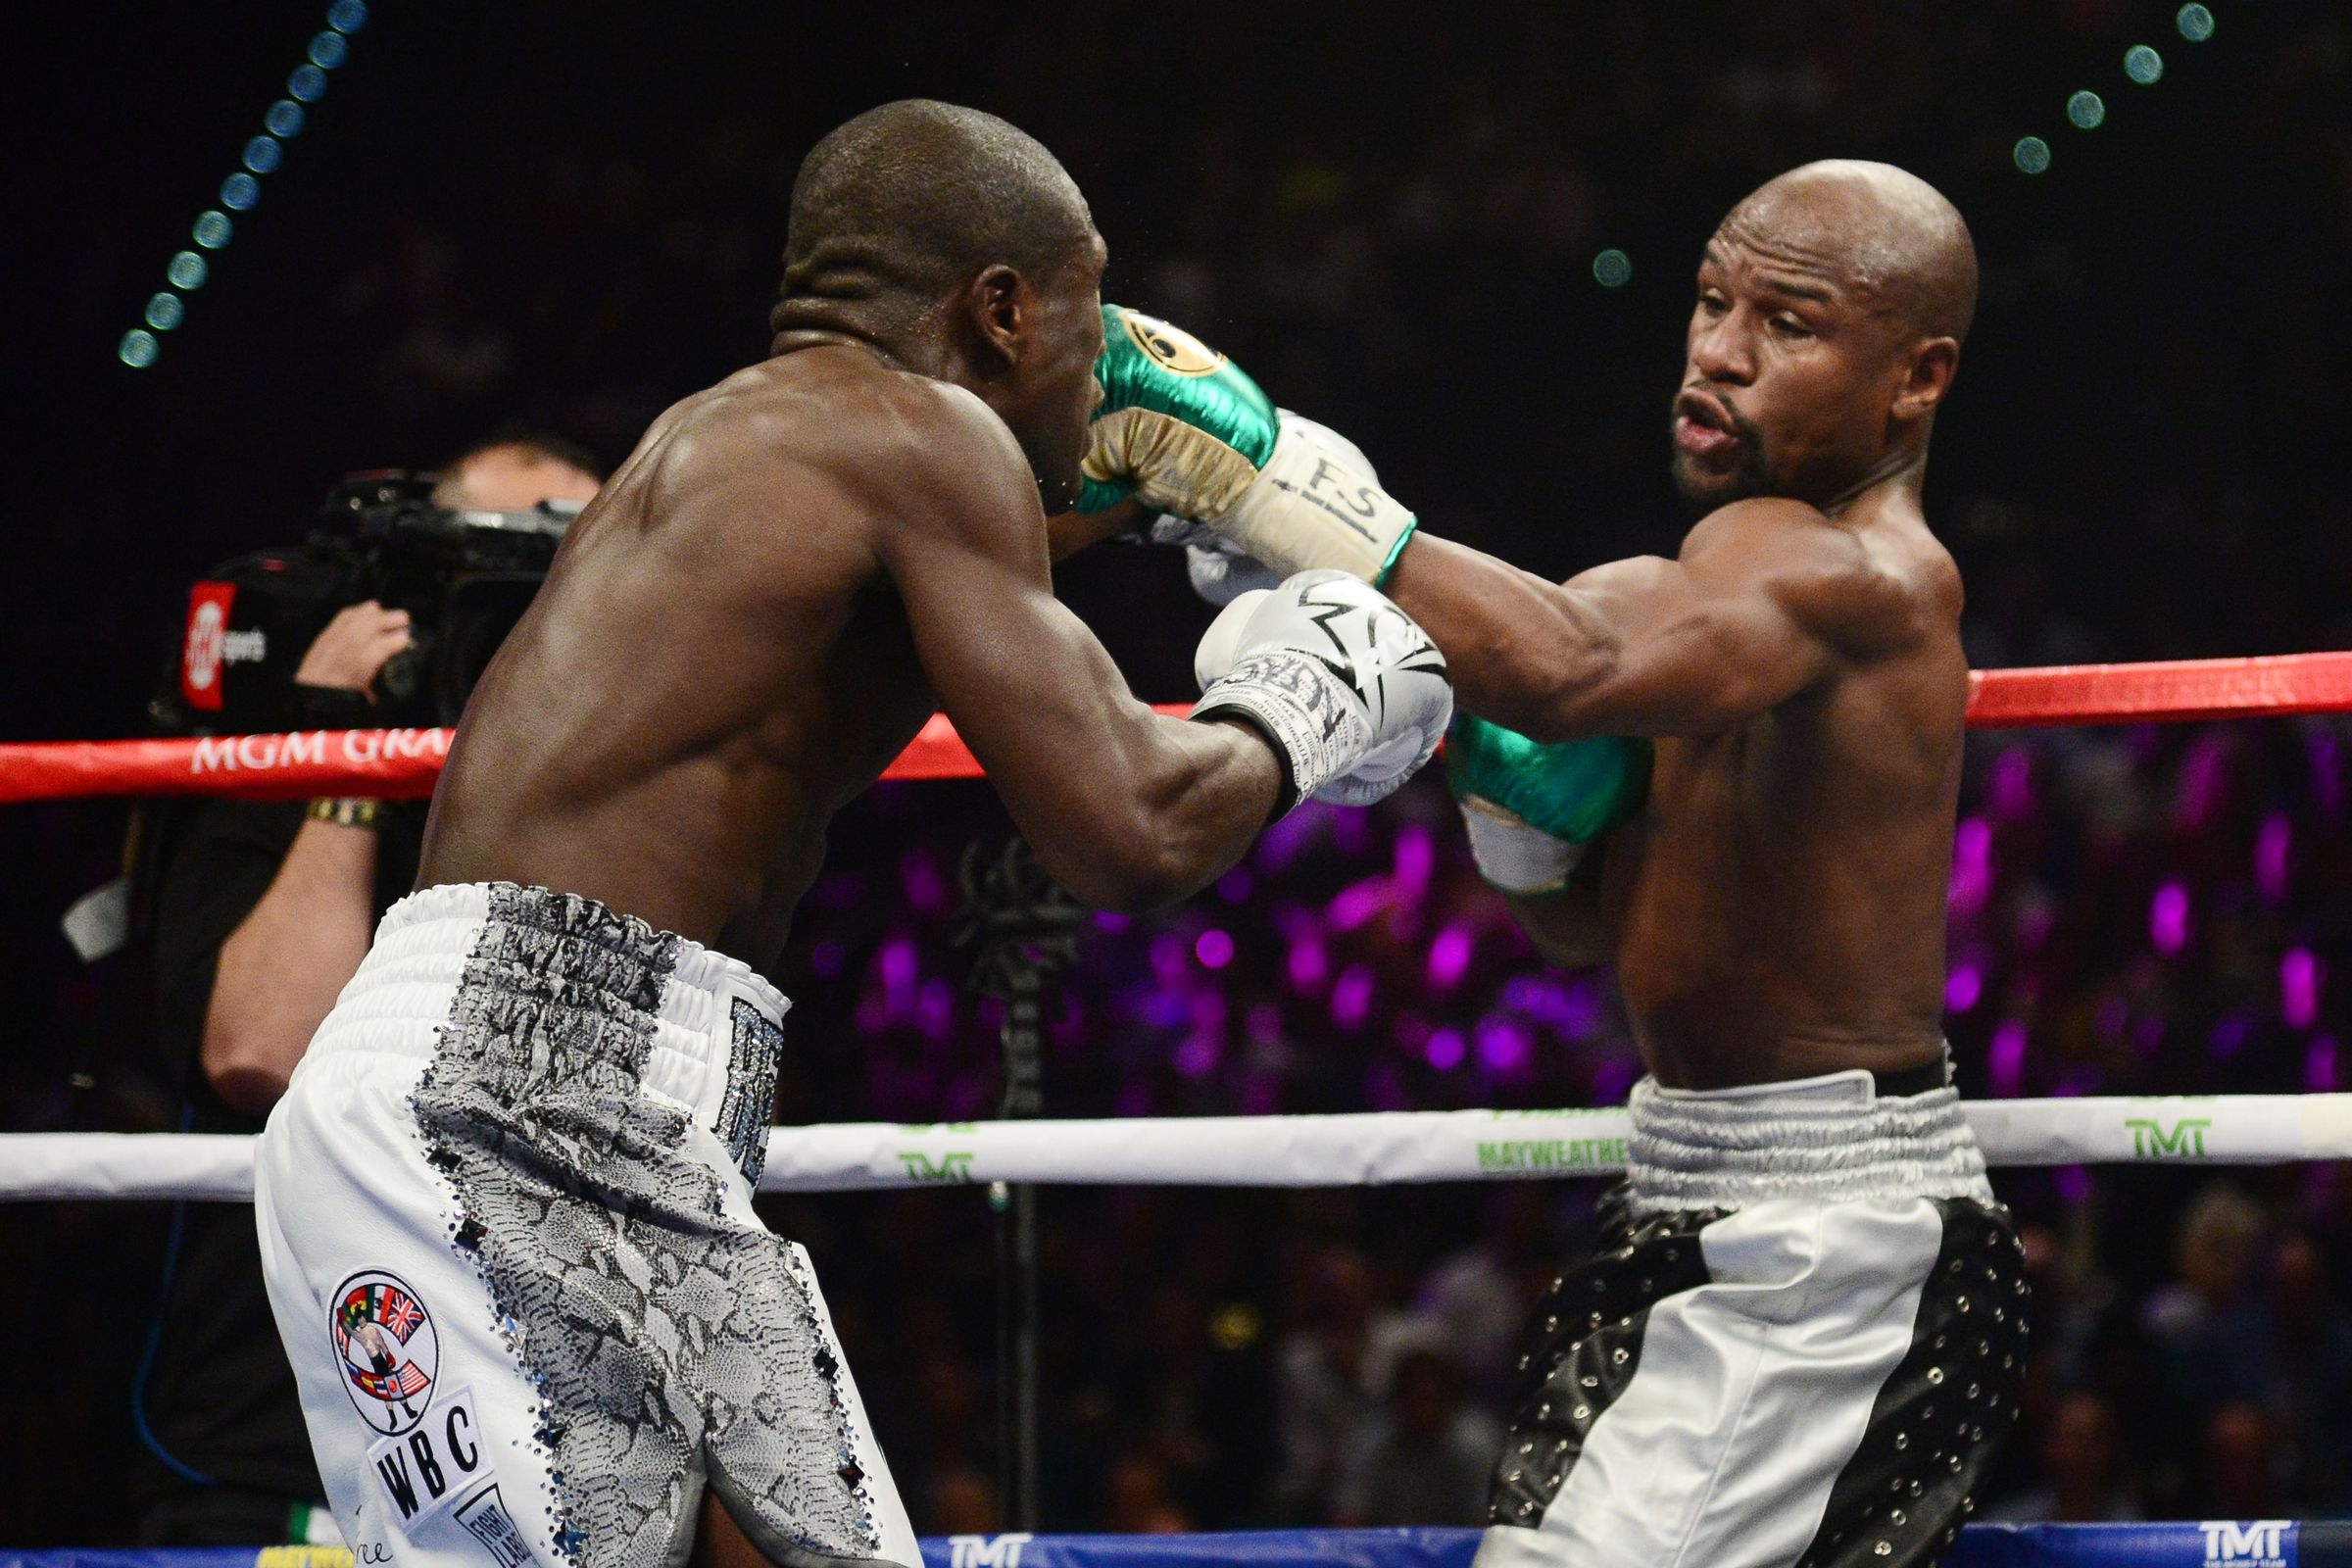 Mayweather beats Berto by decision, improves to 49-0